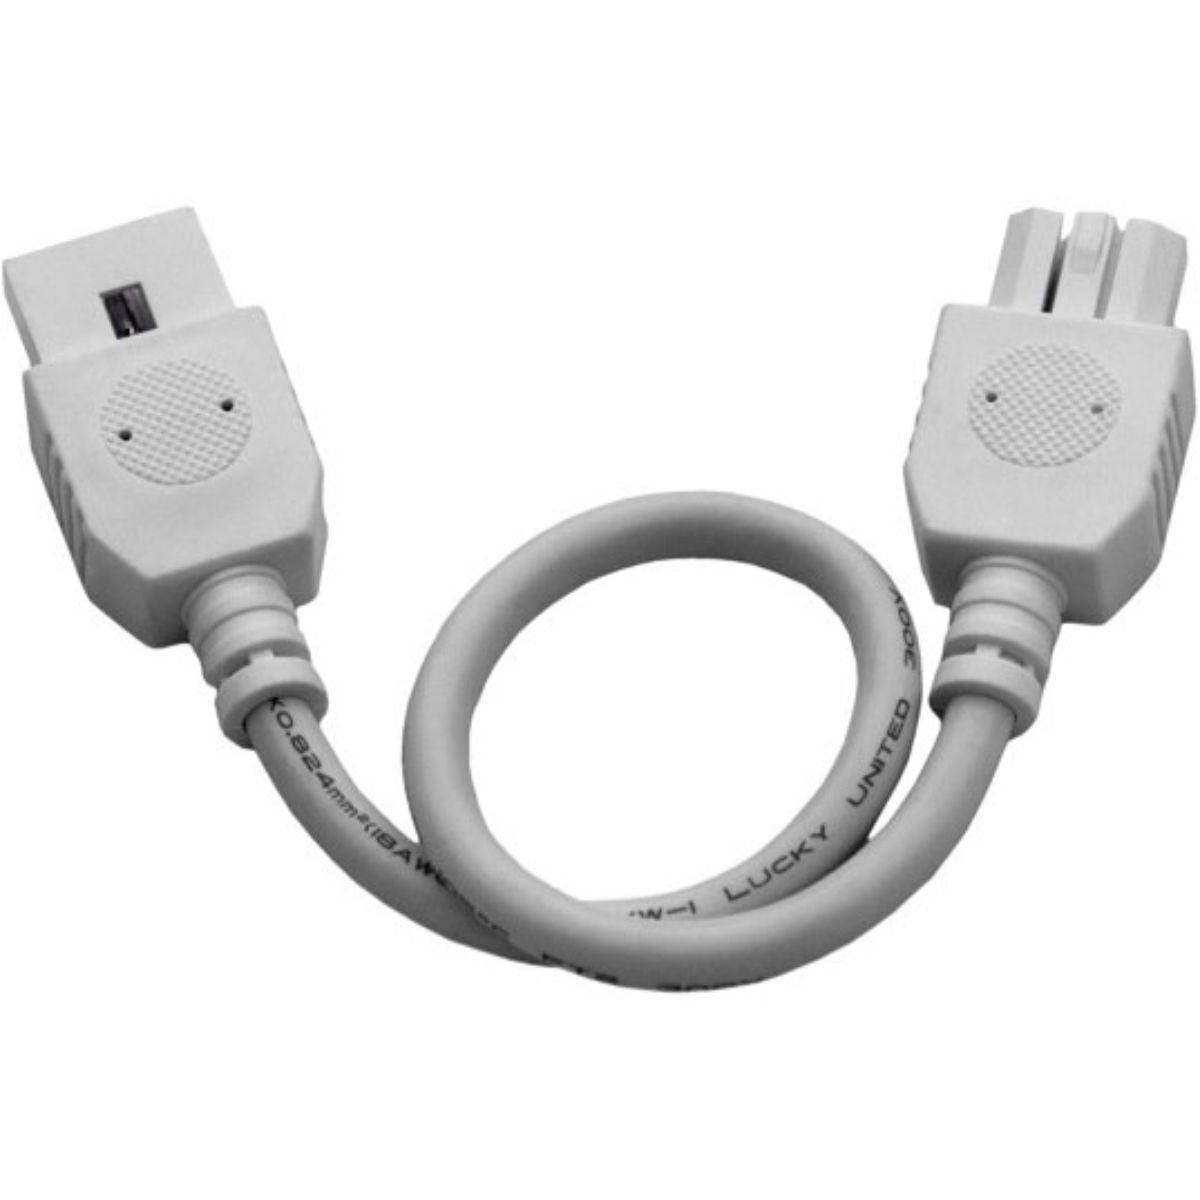 CounterMax 9in. Connecting Cord, White